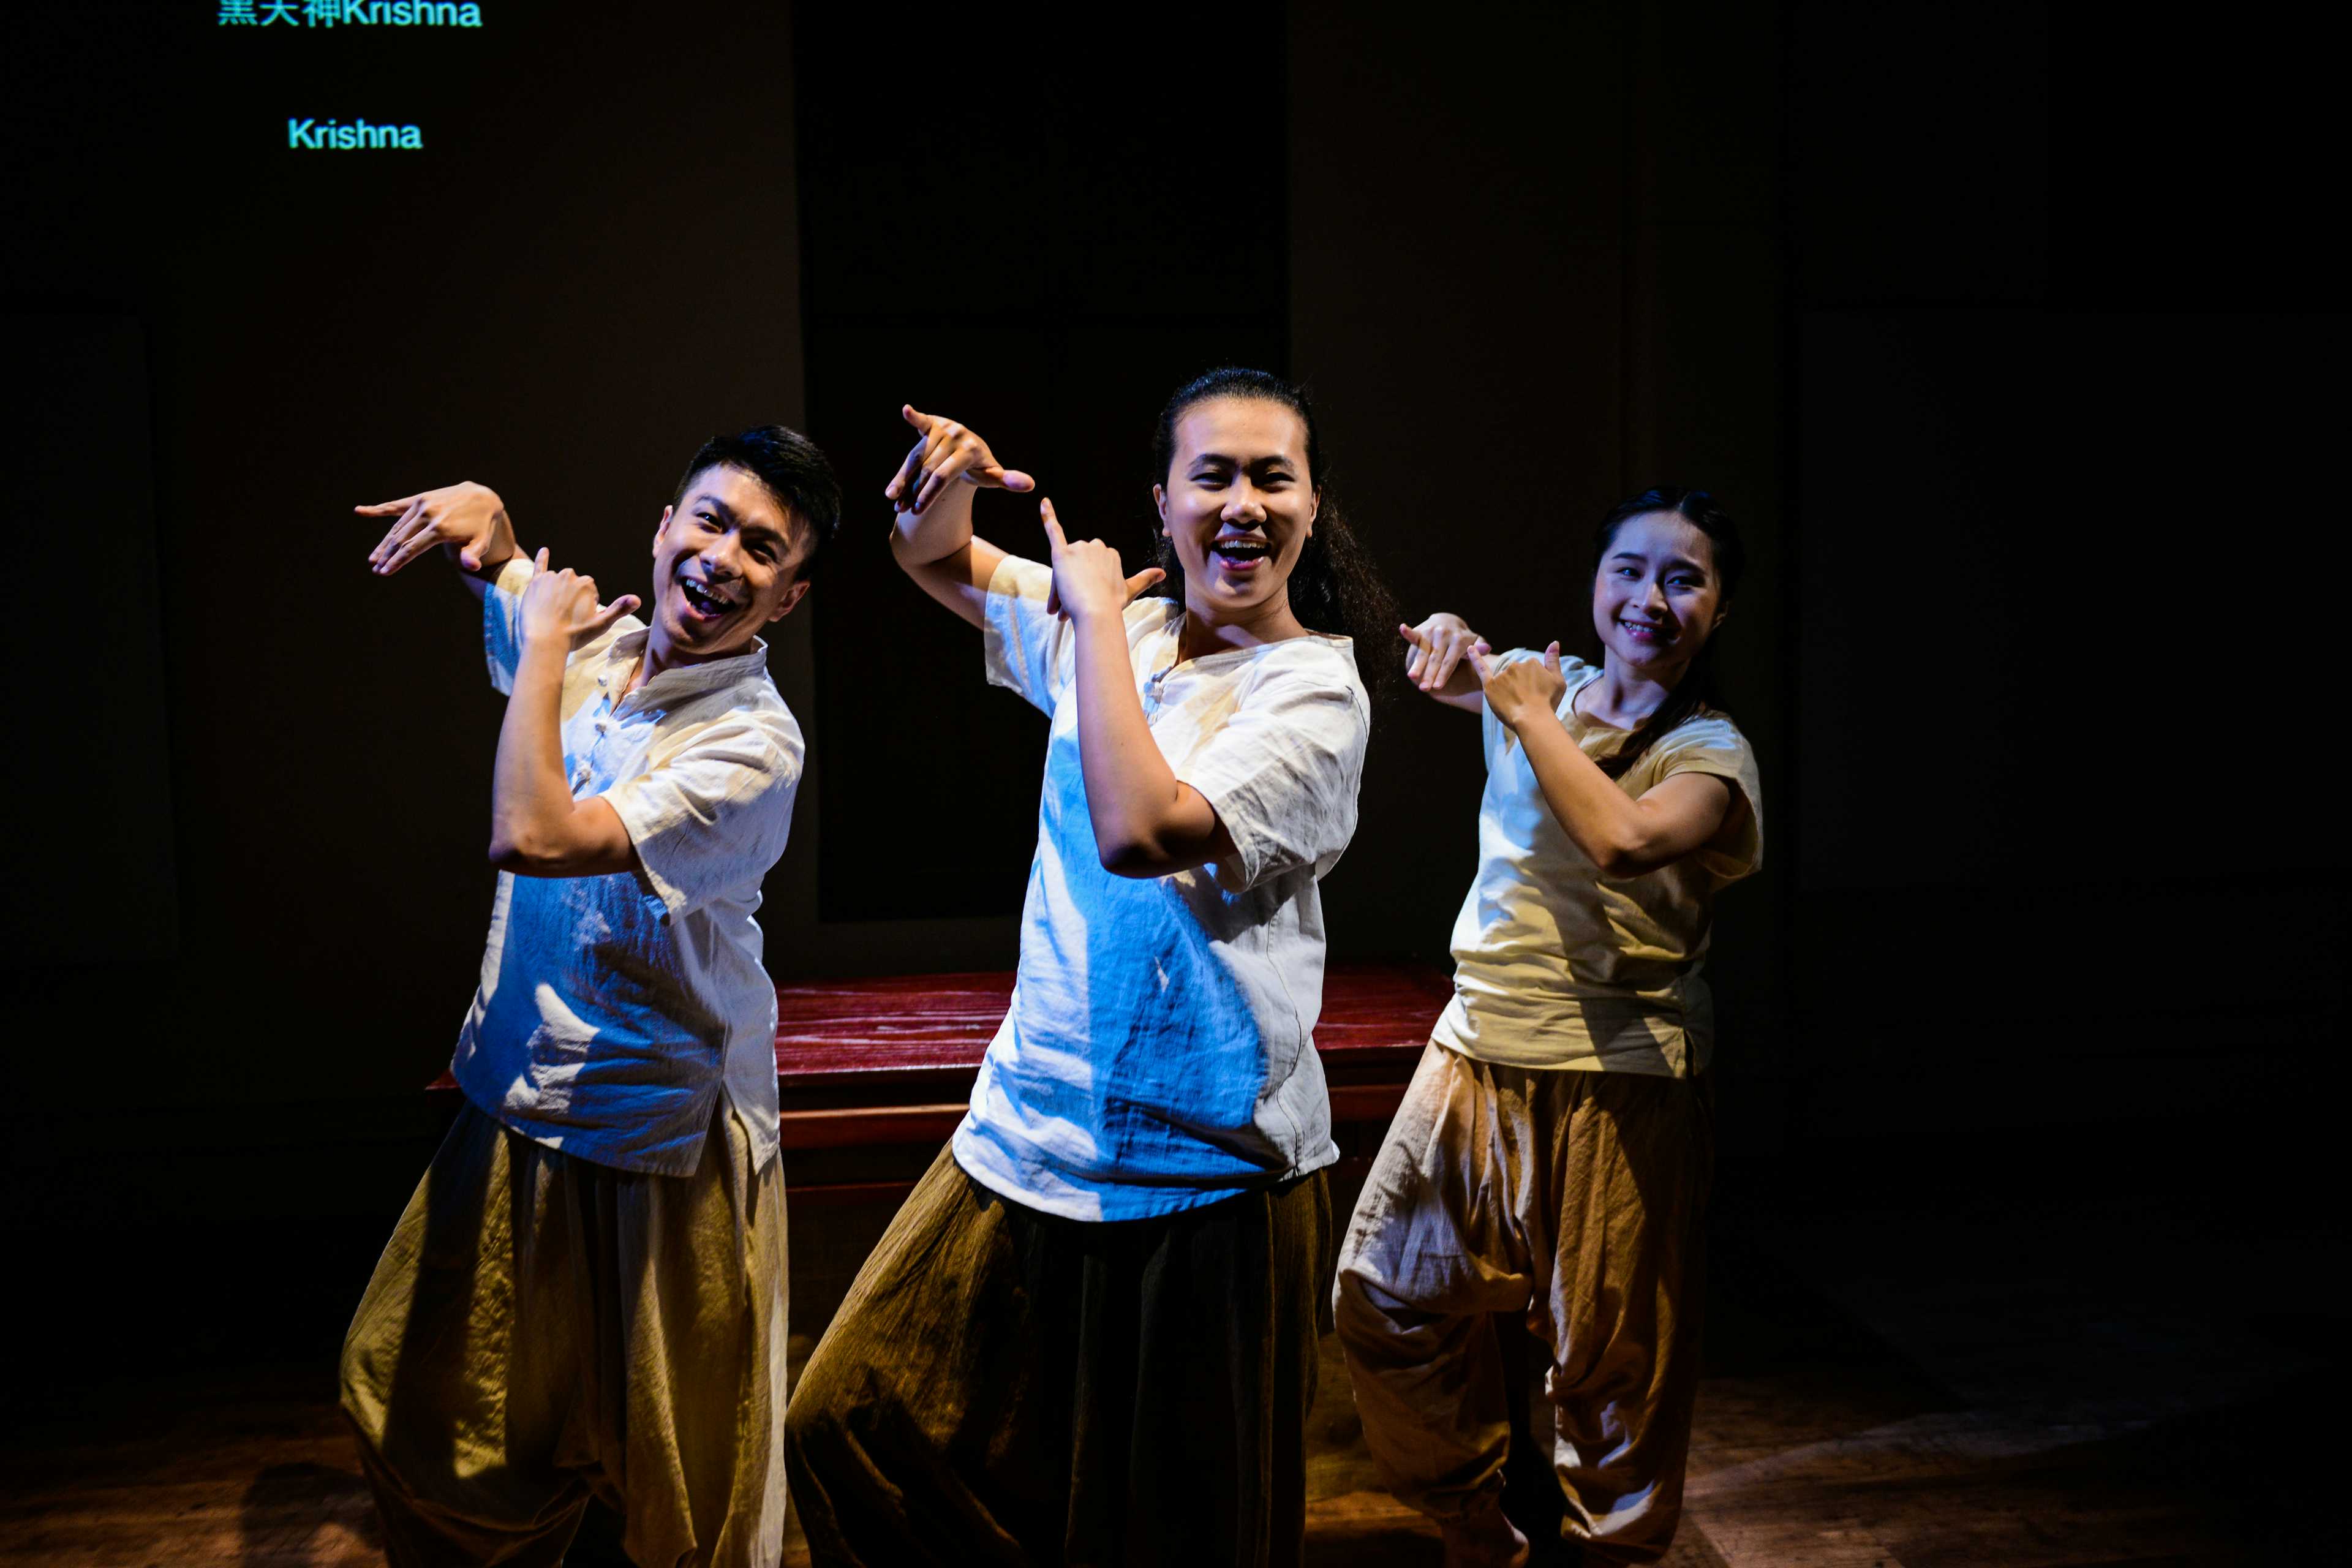 Milk and Honey | Featuring: Billy Sy, Lung Jes, Michelle Li | Tagged as: Milk and Honey, Show | Photo: Fung Wai Sun |  (Rooftop Productions • Hong Kong Theatre Company)  | Rooftop Productions • Hong Kong Theatre Company